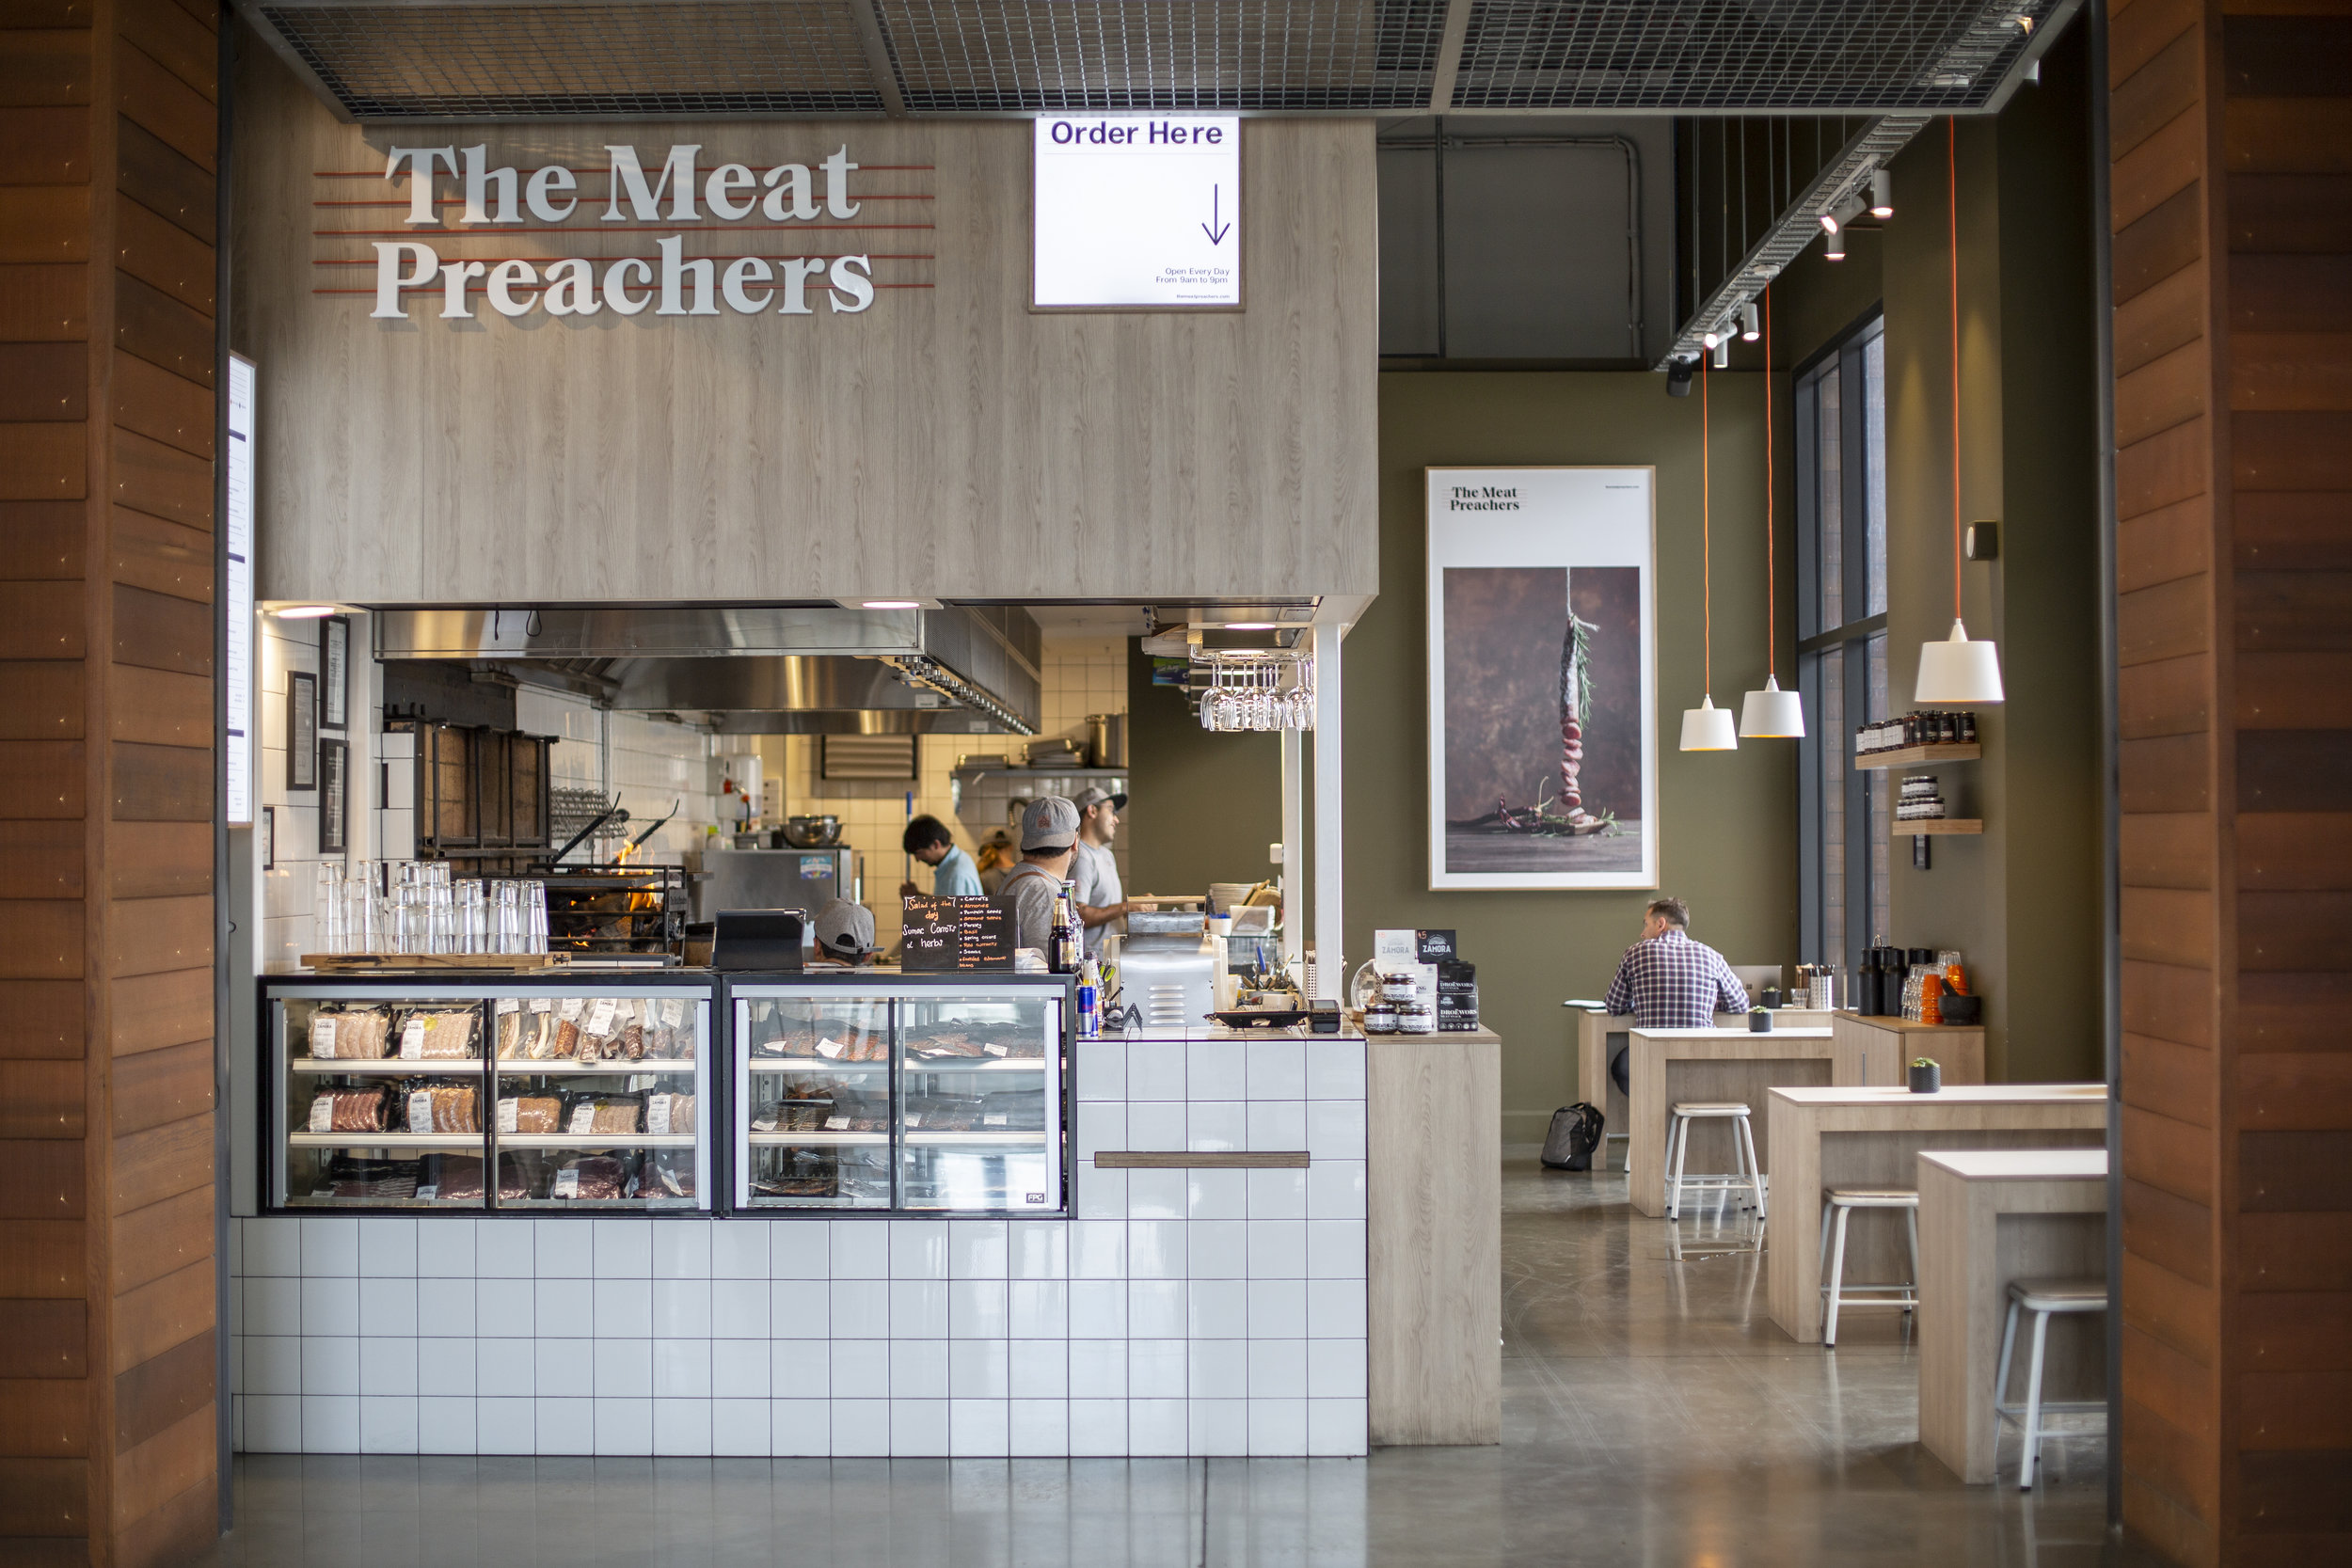 THE MEAT PREACHERS